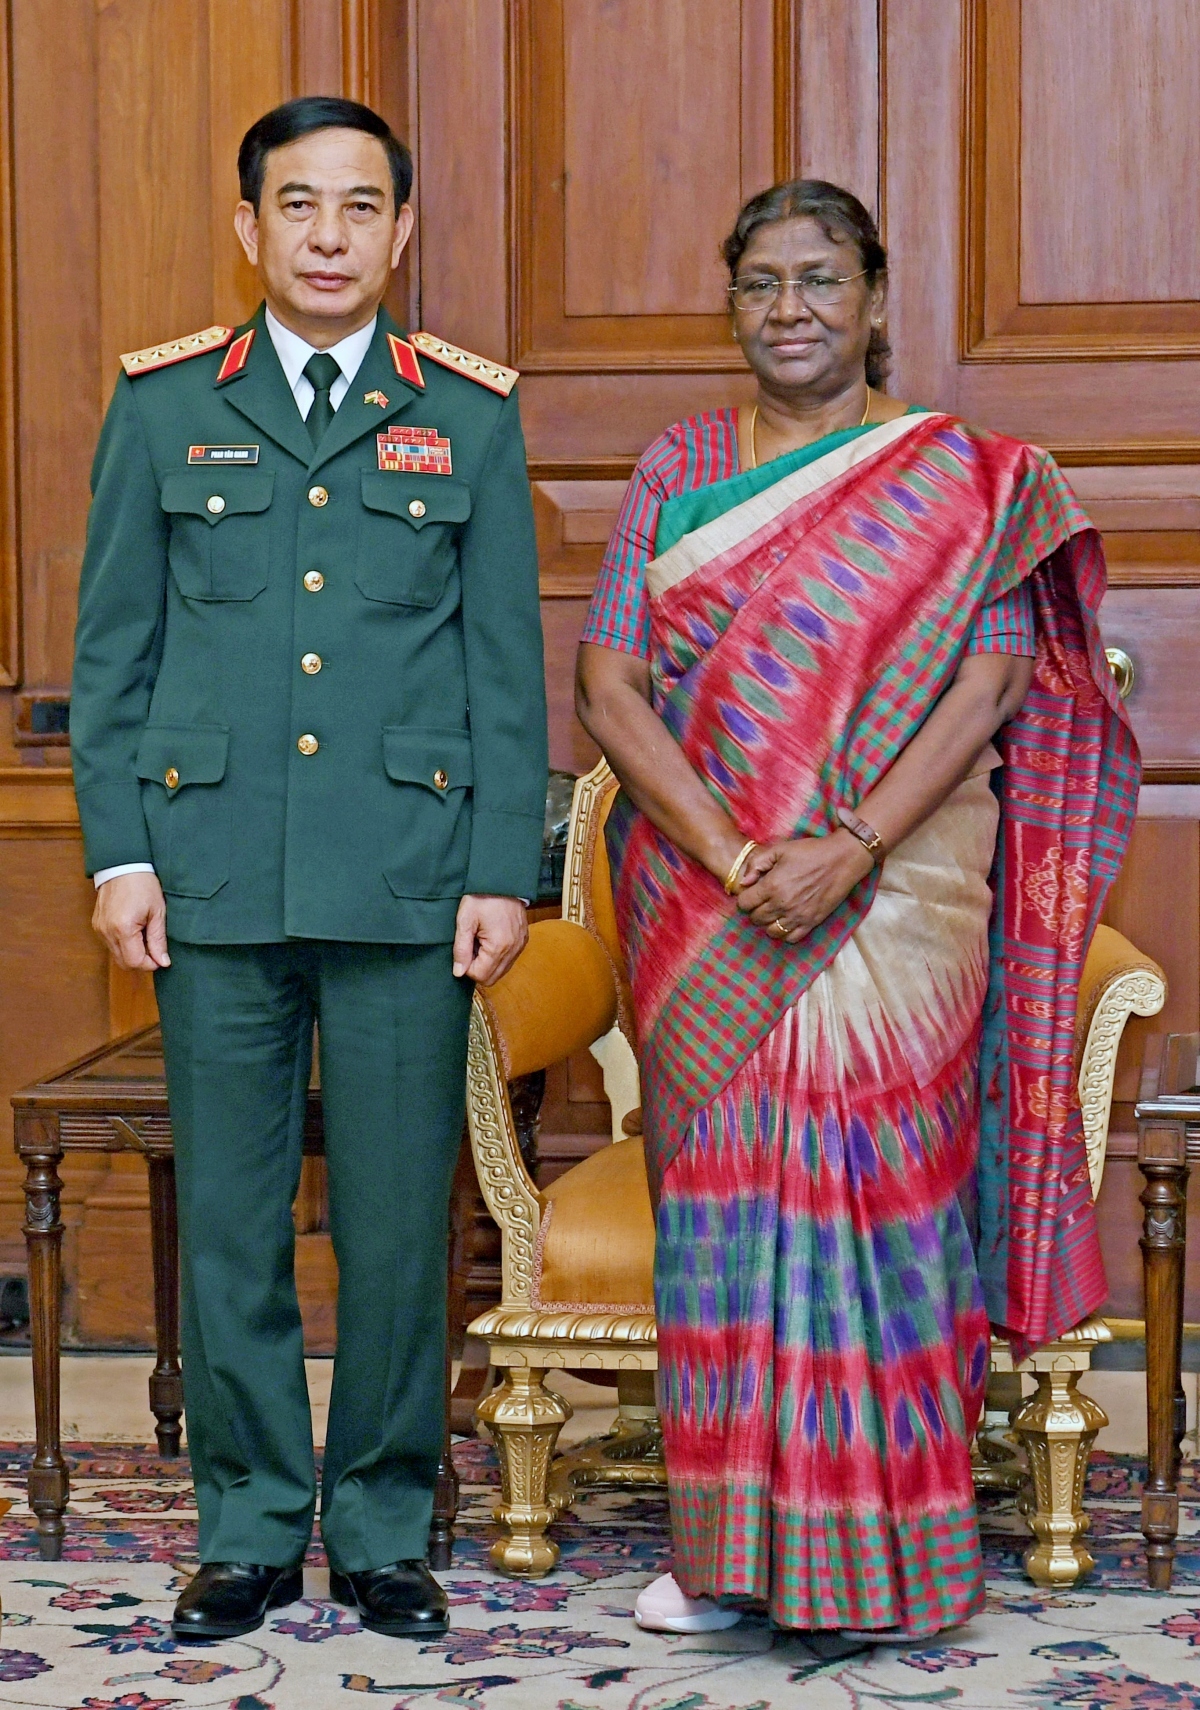 defence cooperation an important pillar in vietnam-india relations picture 2